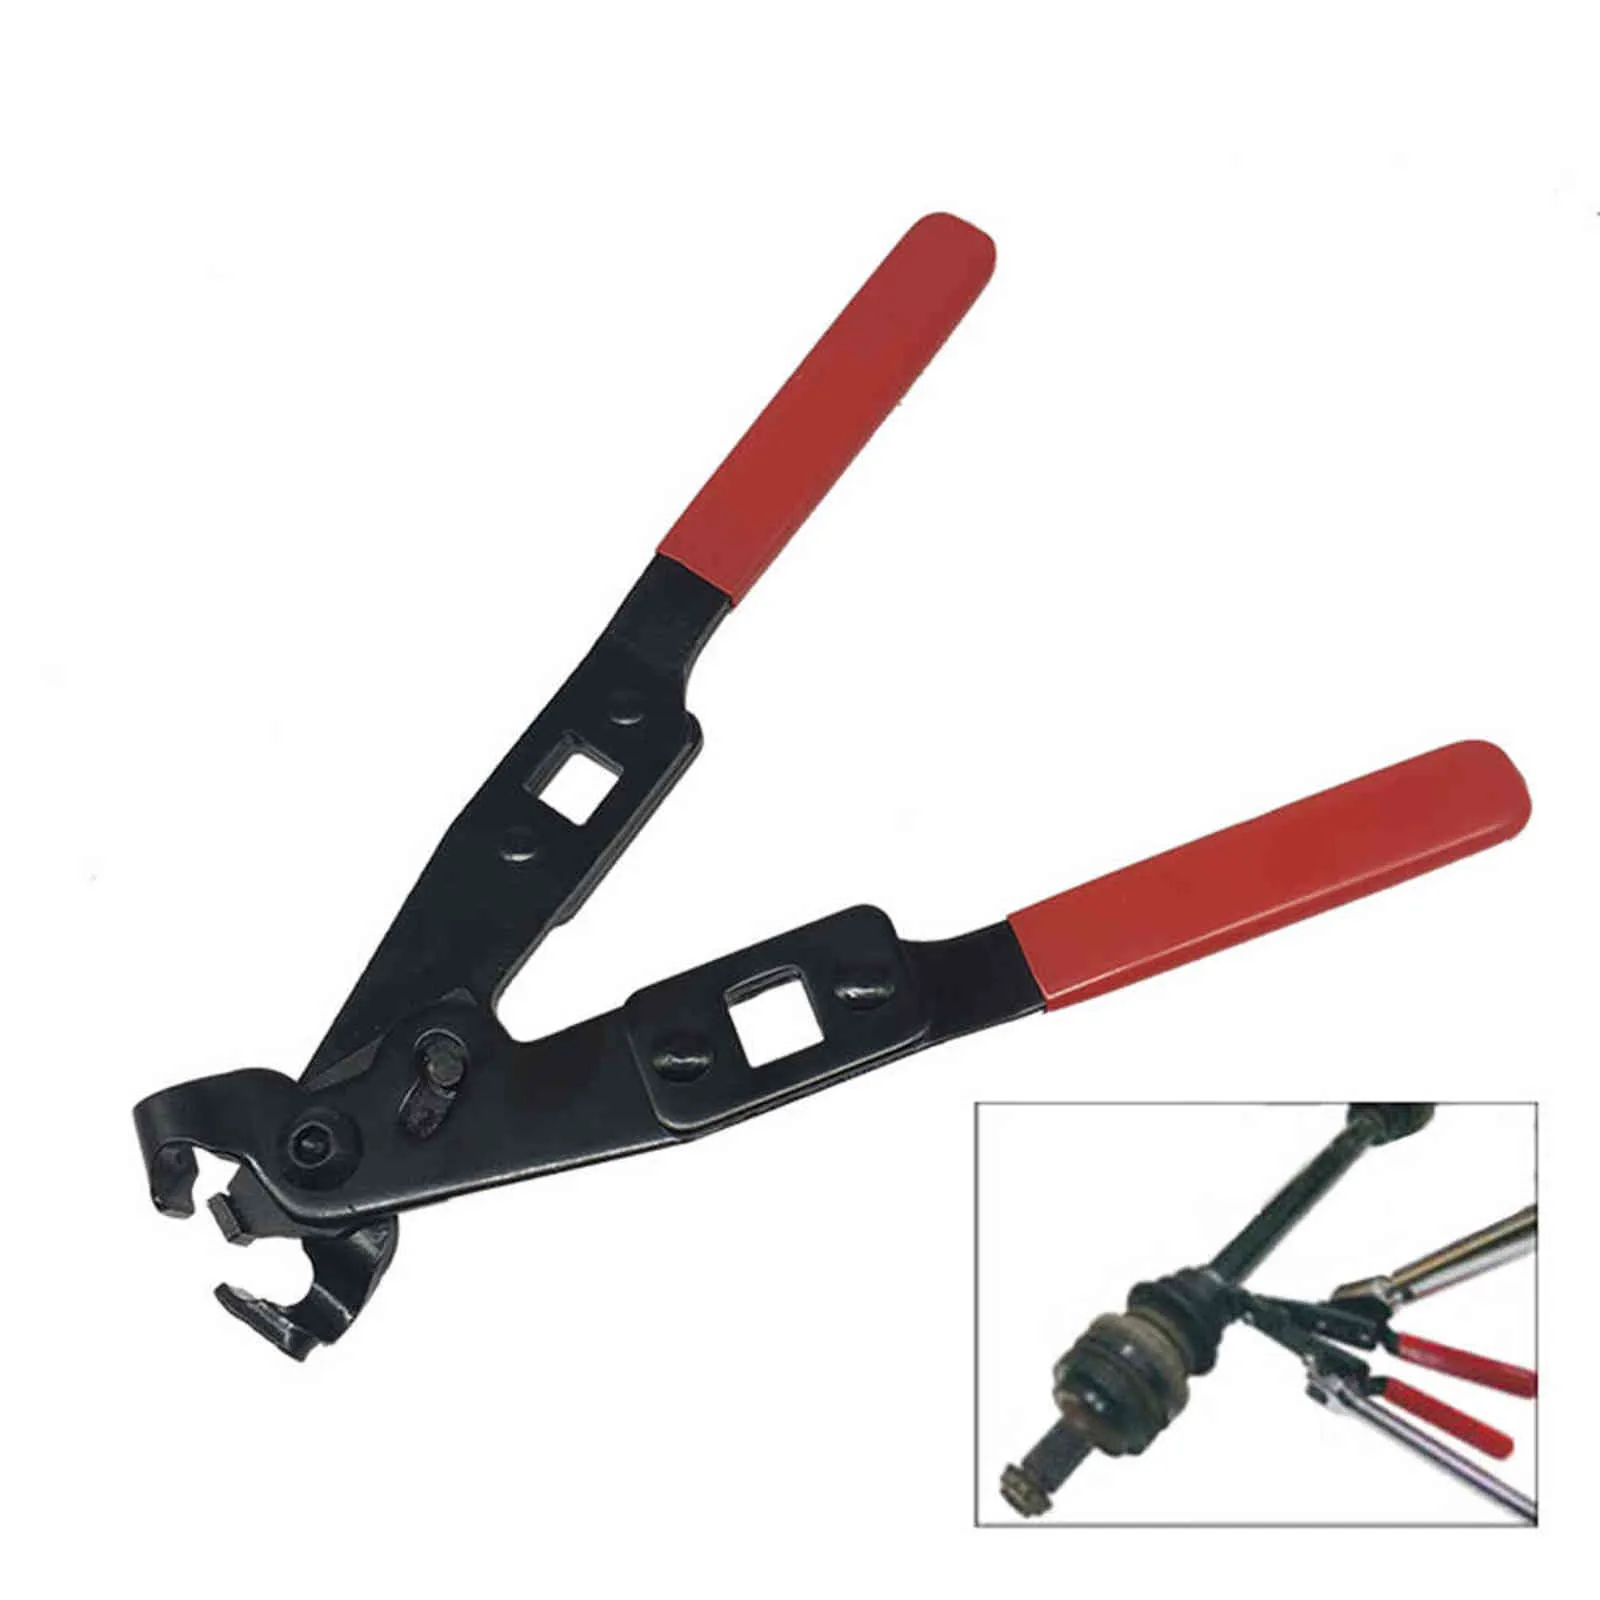 Cable Type Flexible Wire Long Reach Hose Clamp Pliers circlip pliers Multi-tool Car Repairs Removal Hand Tools Alicates 211110